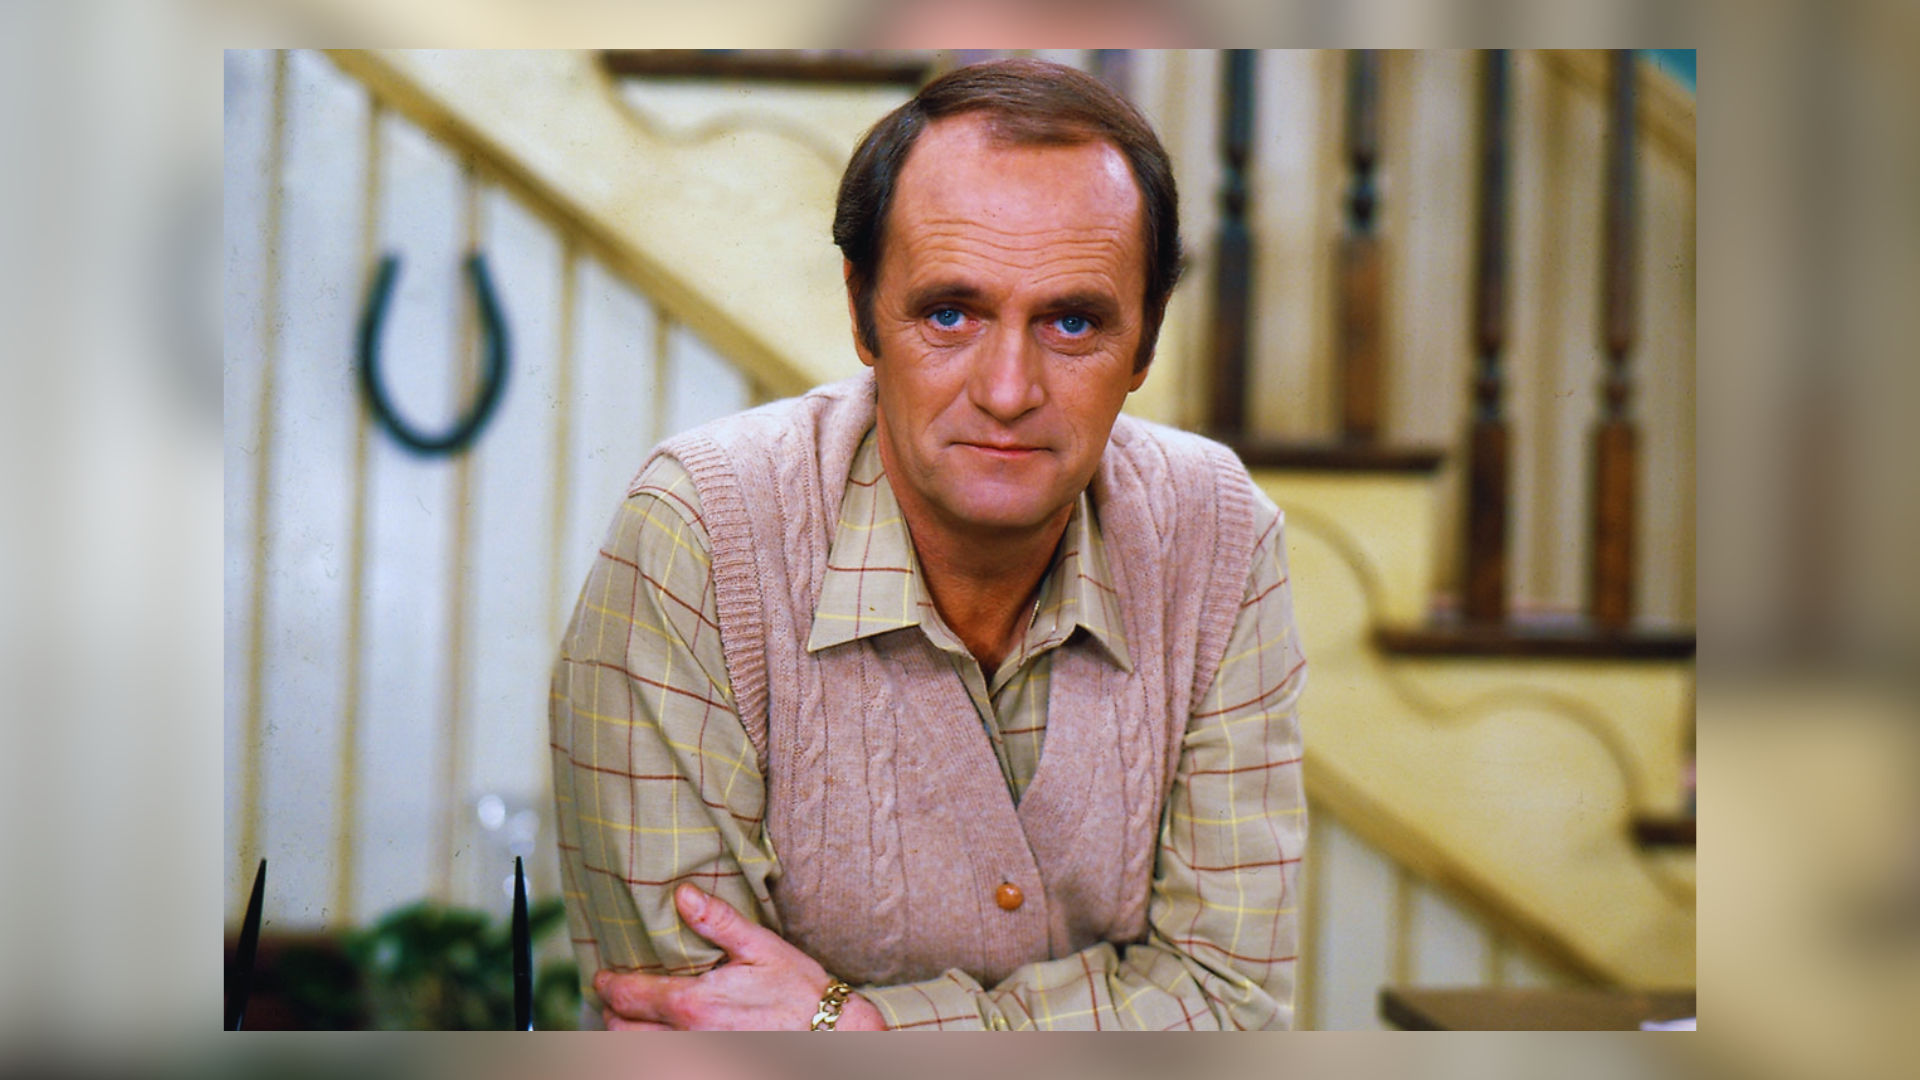 End Of An Era In Comedy: Bob Newhart, Master Of Dry Humor, Passes Away At Age 94